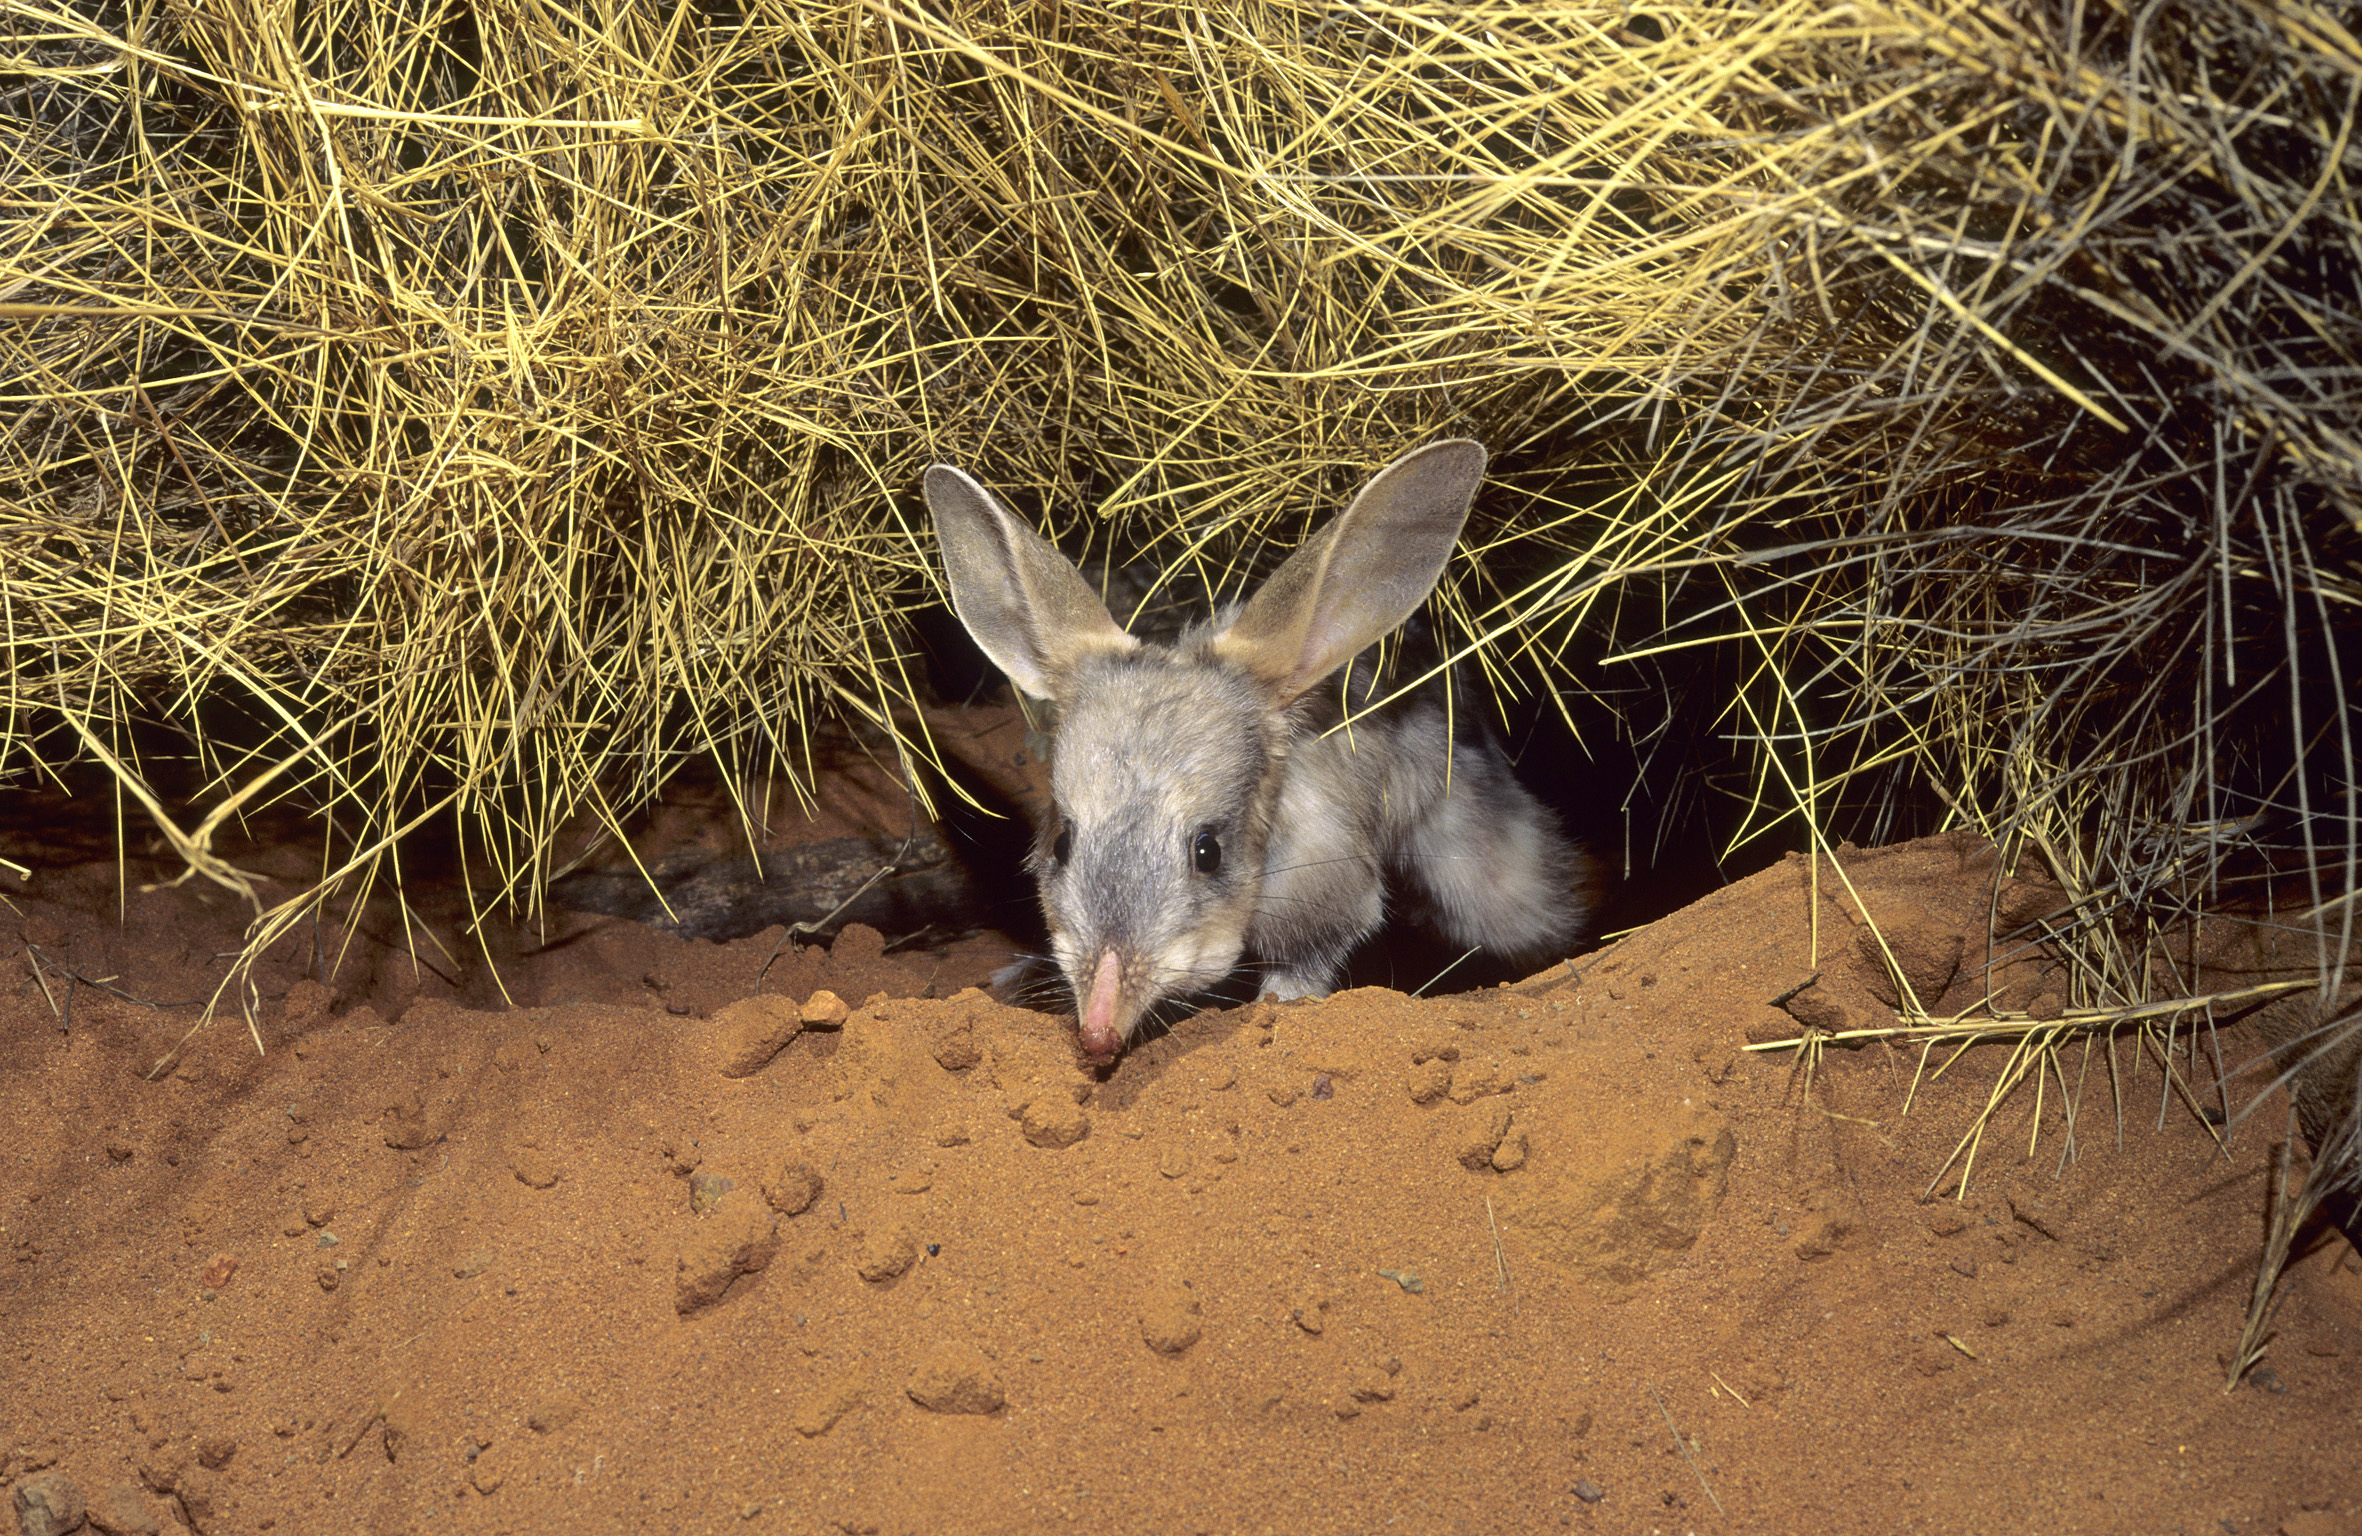 The endangered bilby population has declined significantly in Australia. 